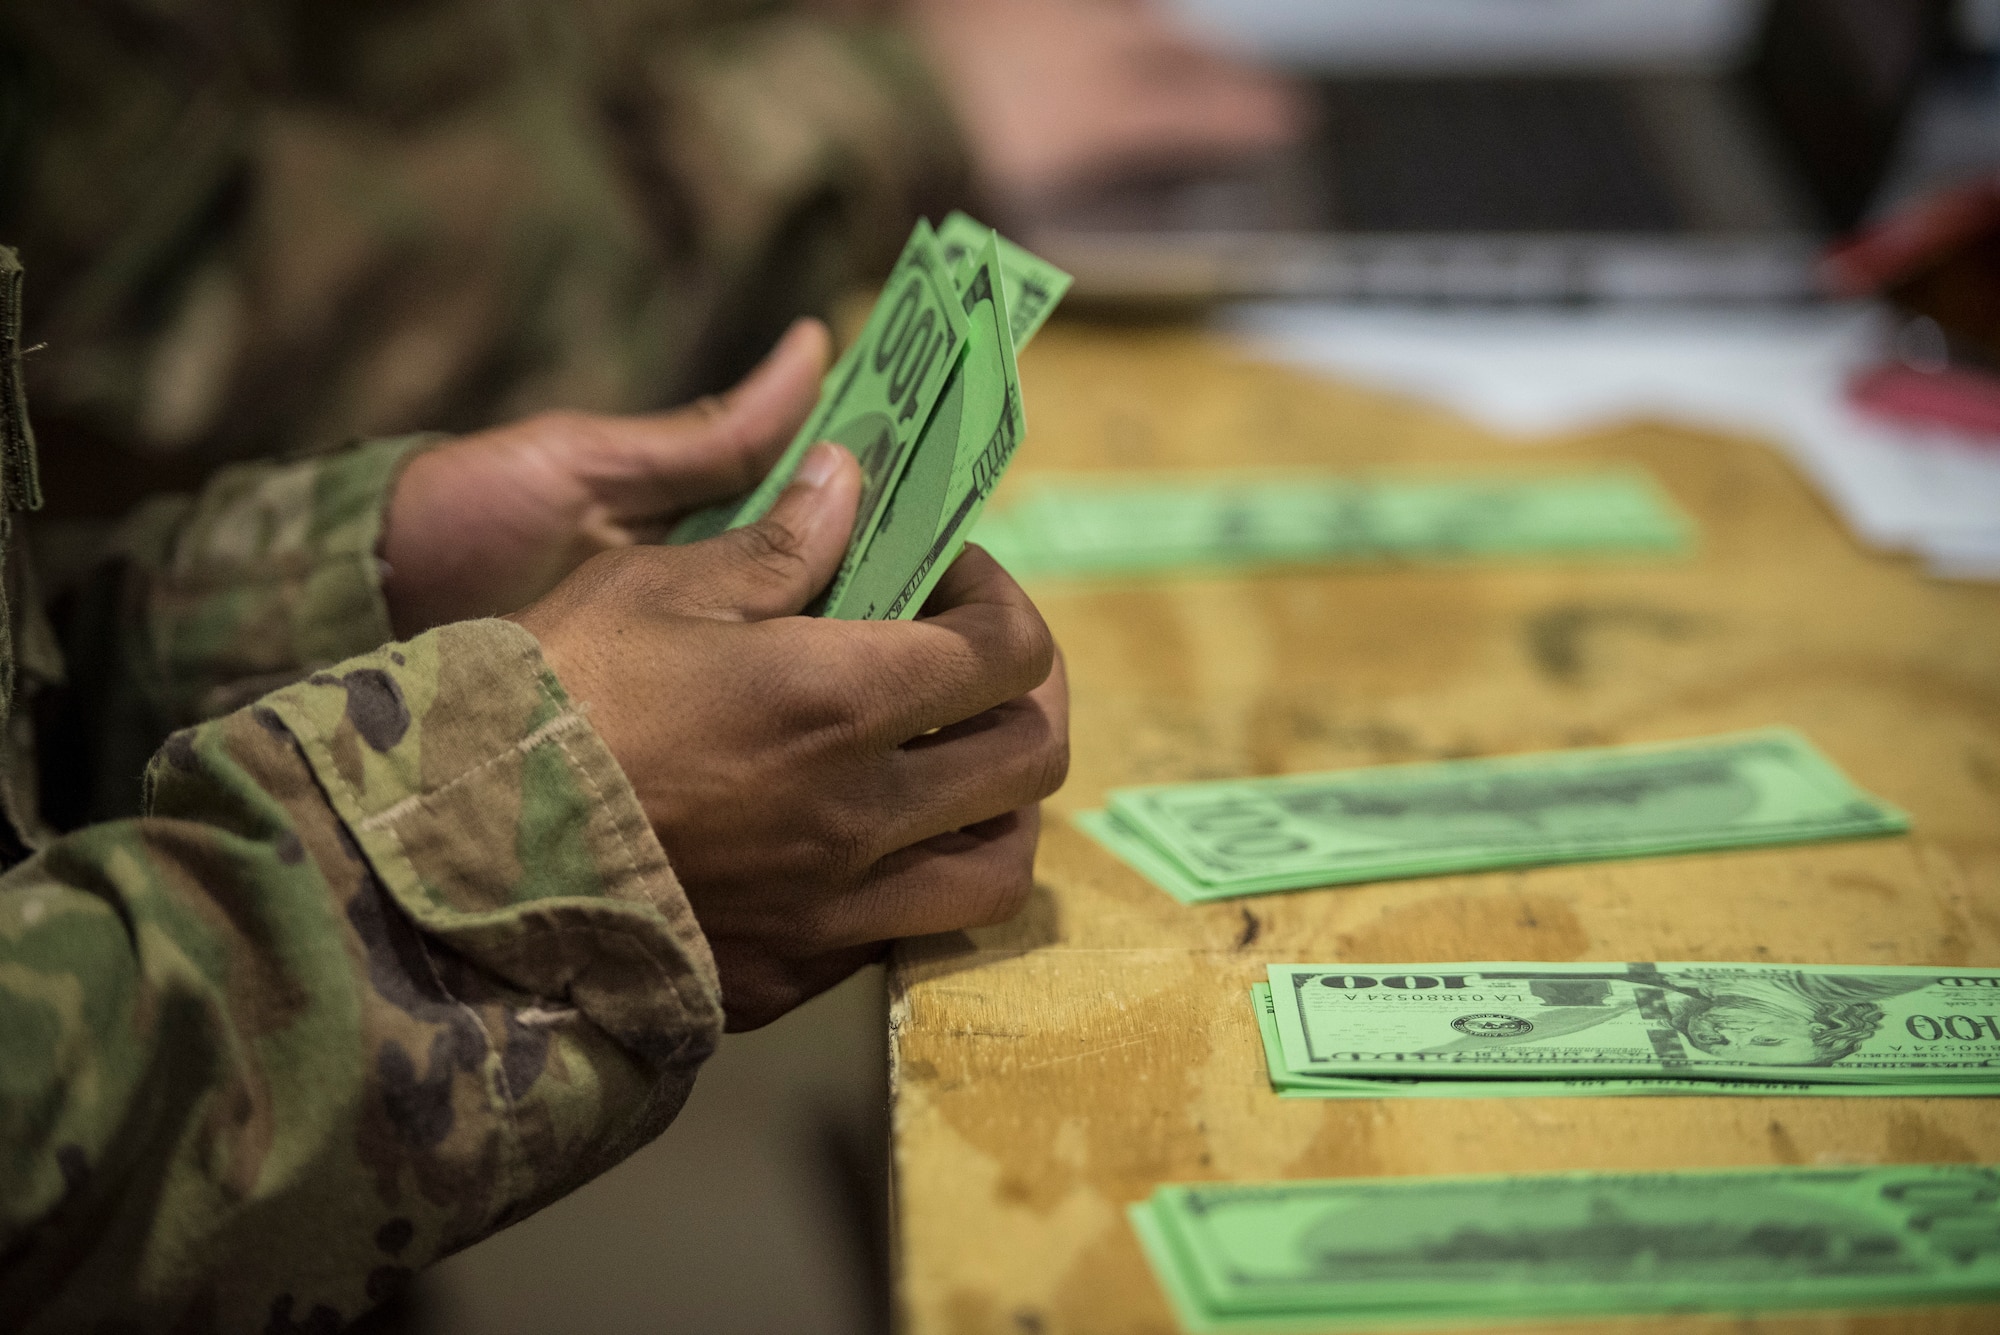 An Airman counts out fake money during a 27th Special Operations Comptroller Squadron and 27th Special Operations Contracting Squadron training exercise at Cannon Air Force Base, N.M., Apr. 18, 2019. Airmen were separated into different groups, balanced out and tasked to find solutions to mock-deployment situations created throughout the three-day training event. (U.S. Air Force photo by Senior Airman Lane T. Plummer)